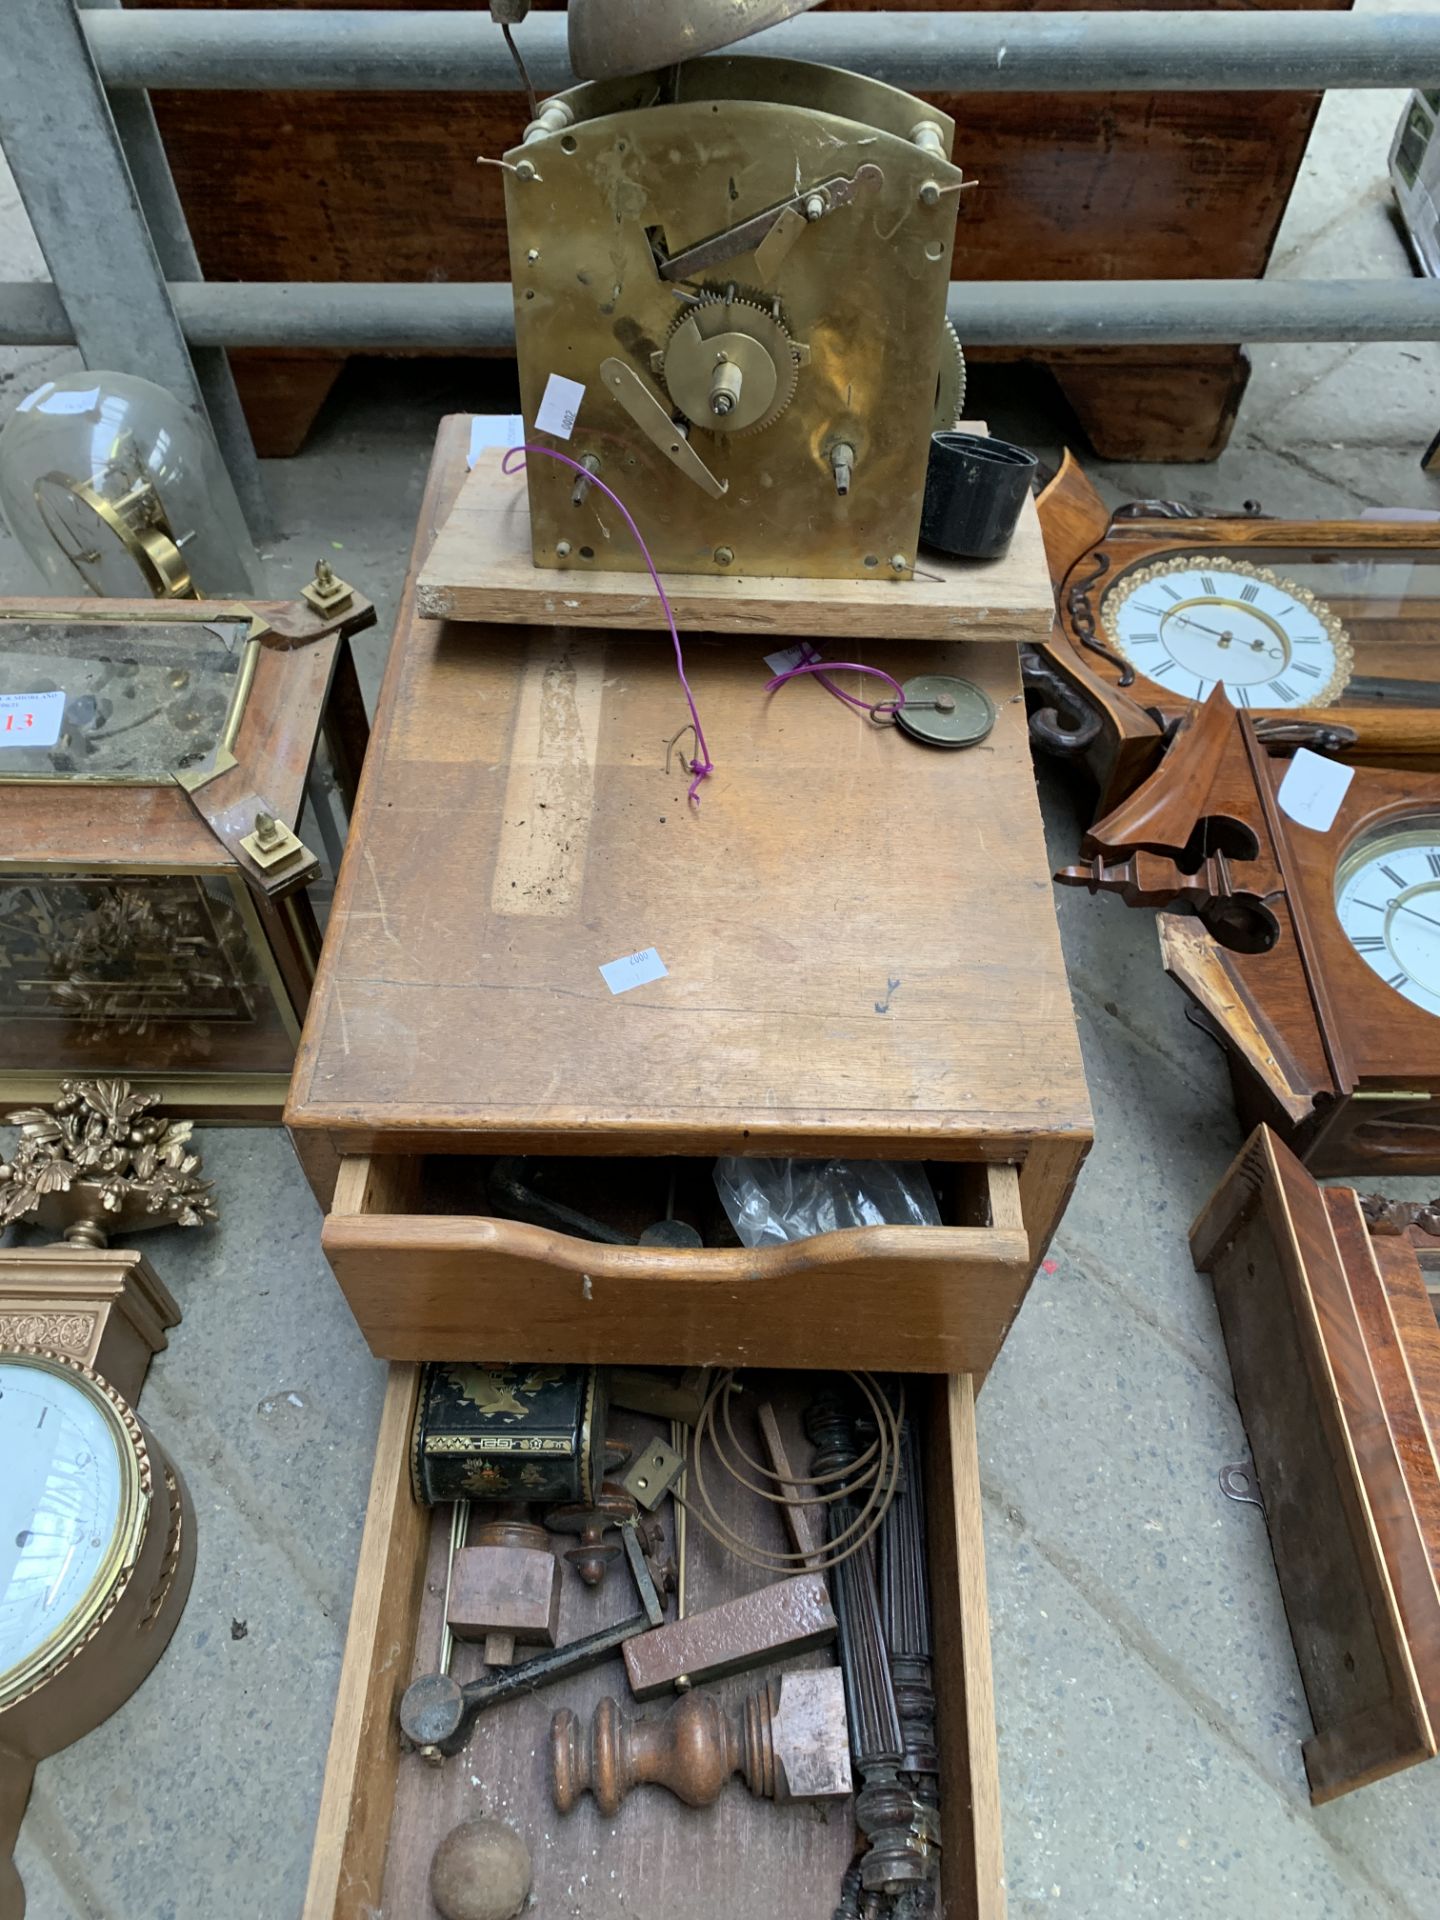 Clock movement and a wooden two door cabinet containing clock parts